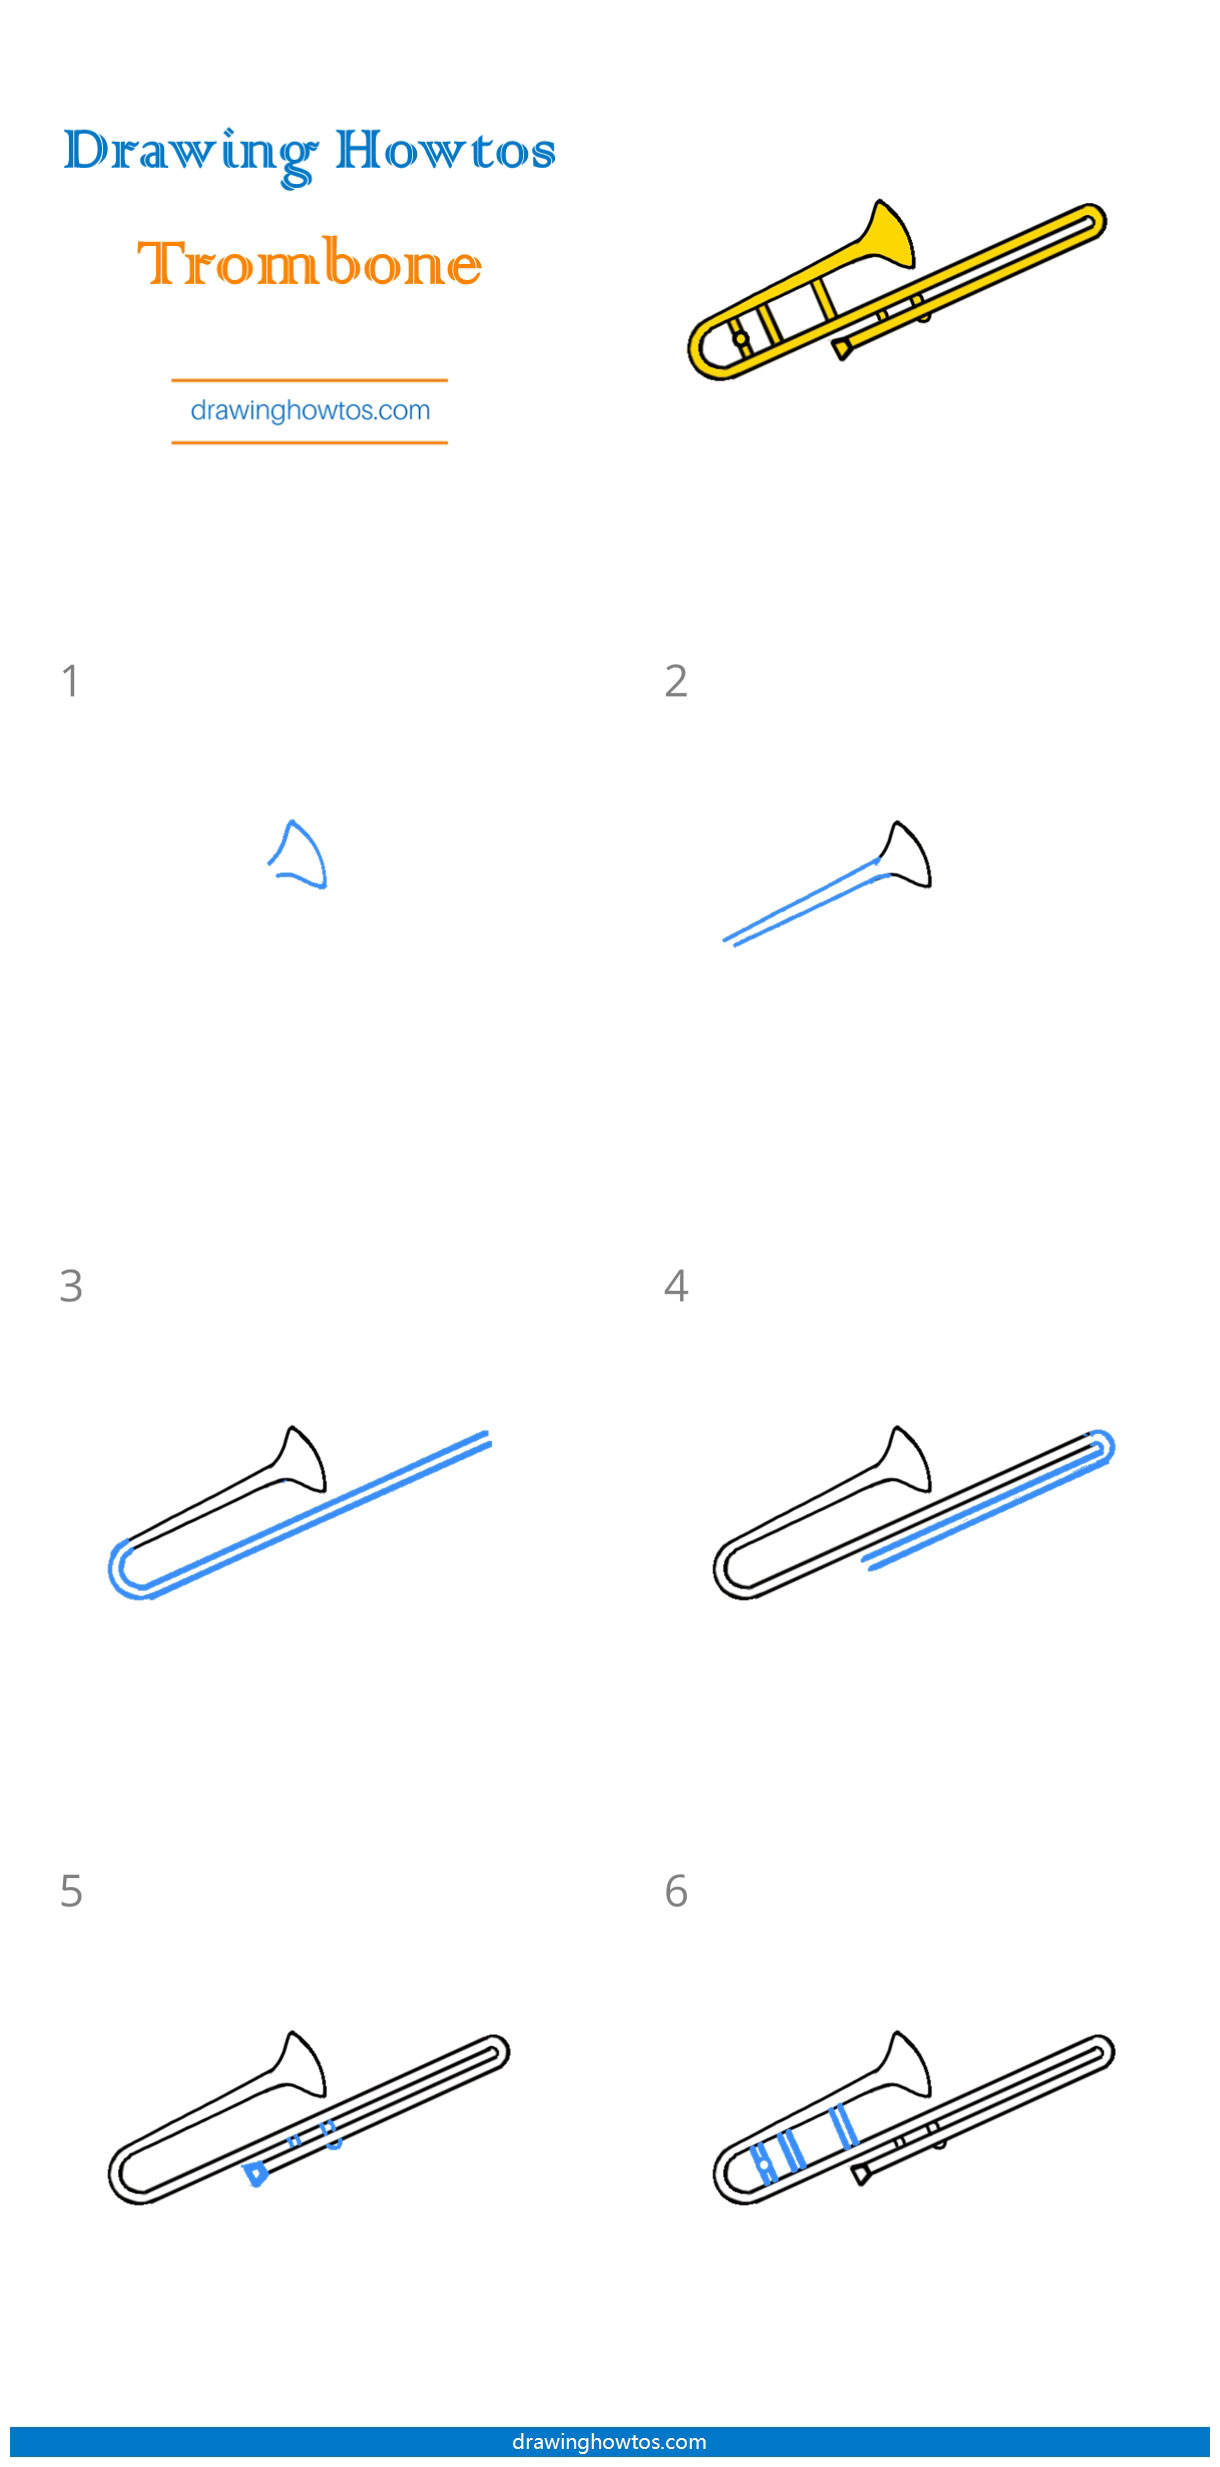 How to Draw a Trombone Step by Step